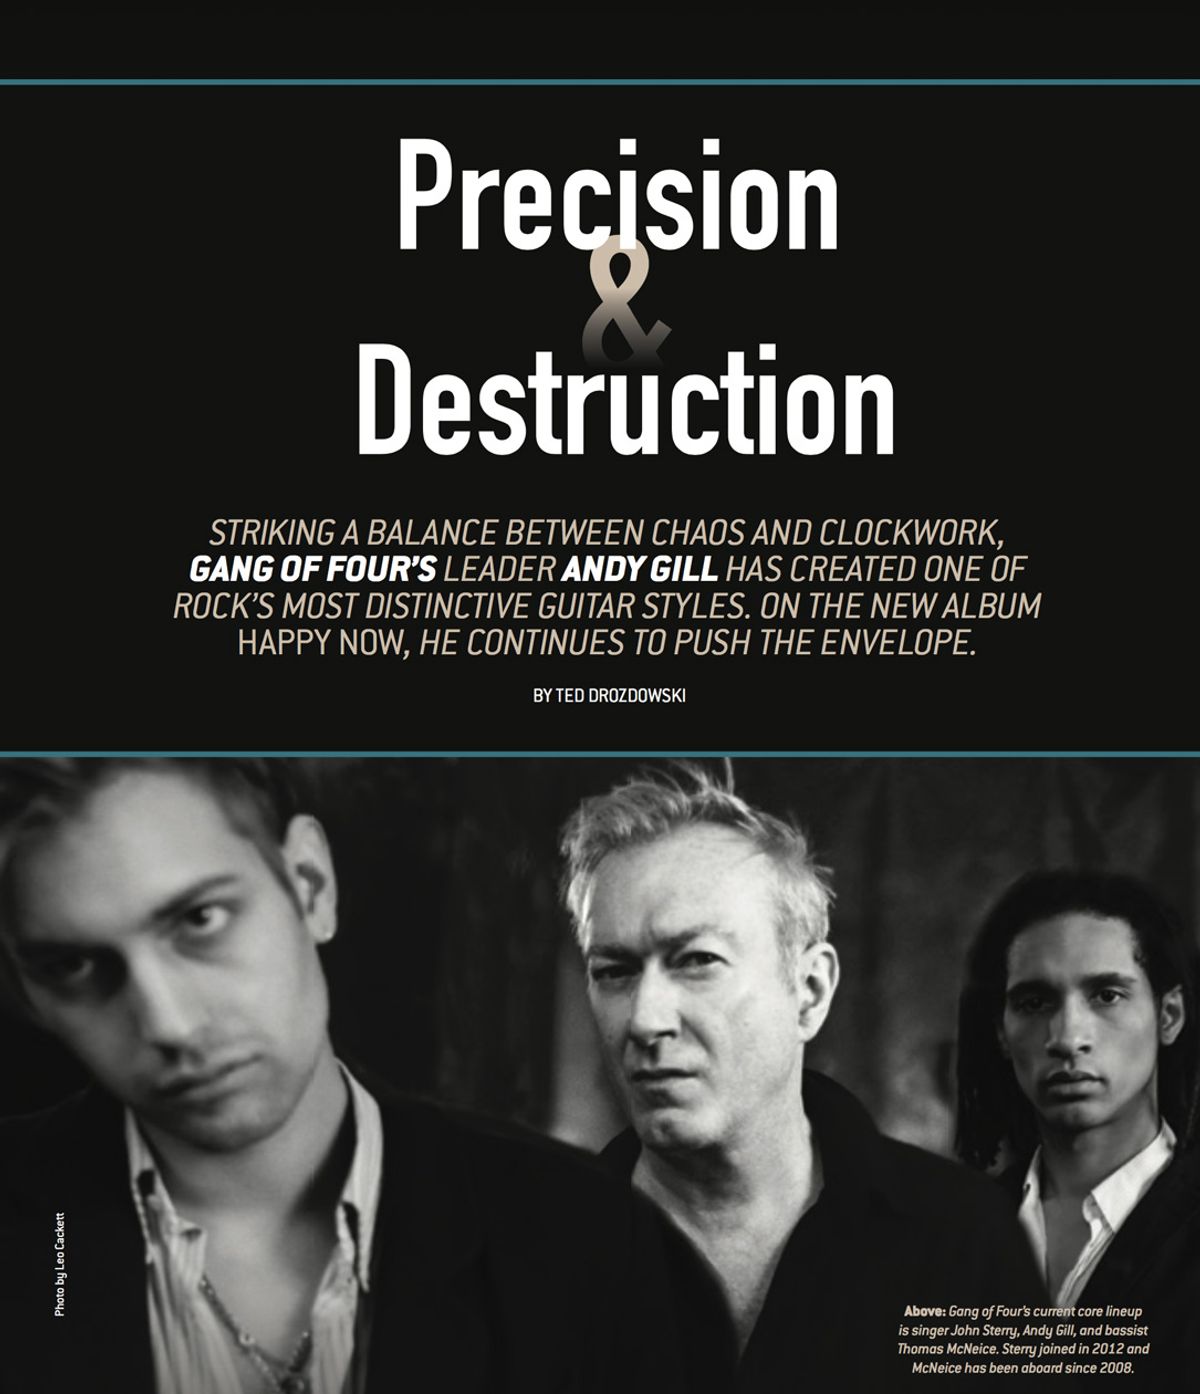 Gang of Four’s Andy Gill: Precision and Destruction